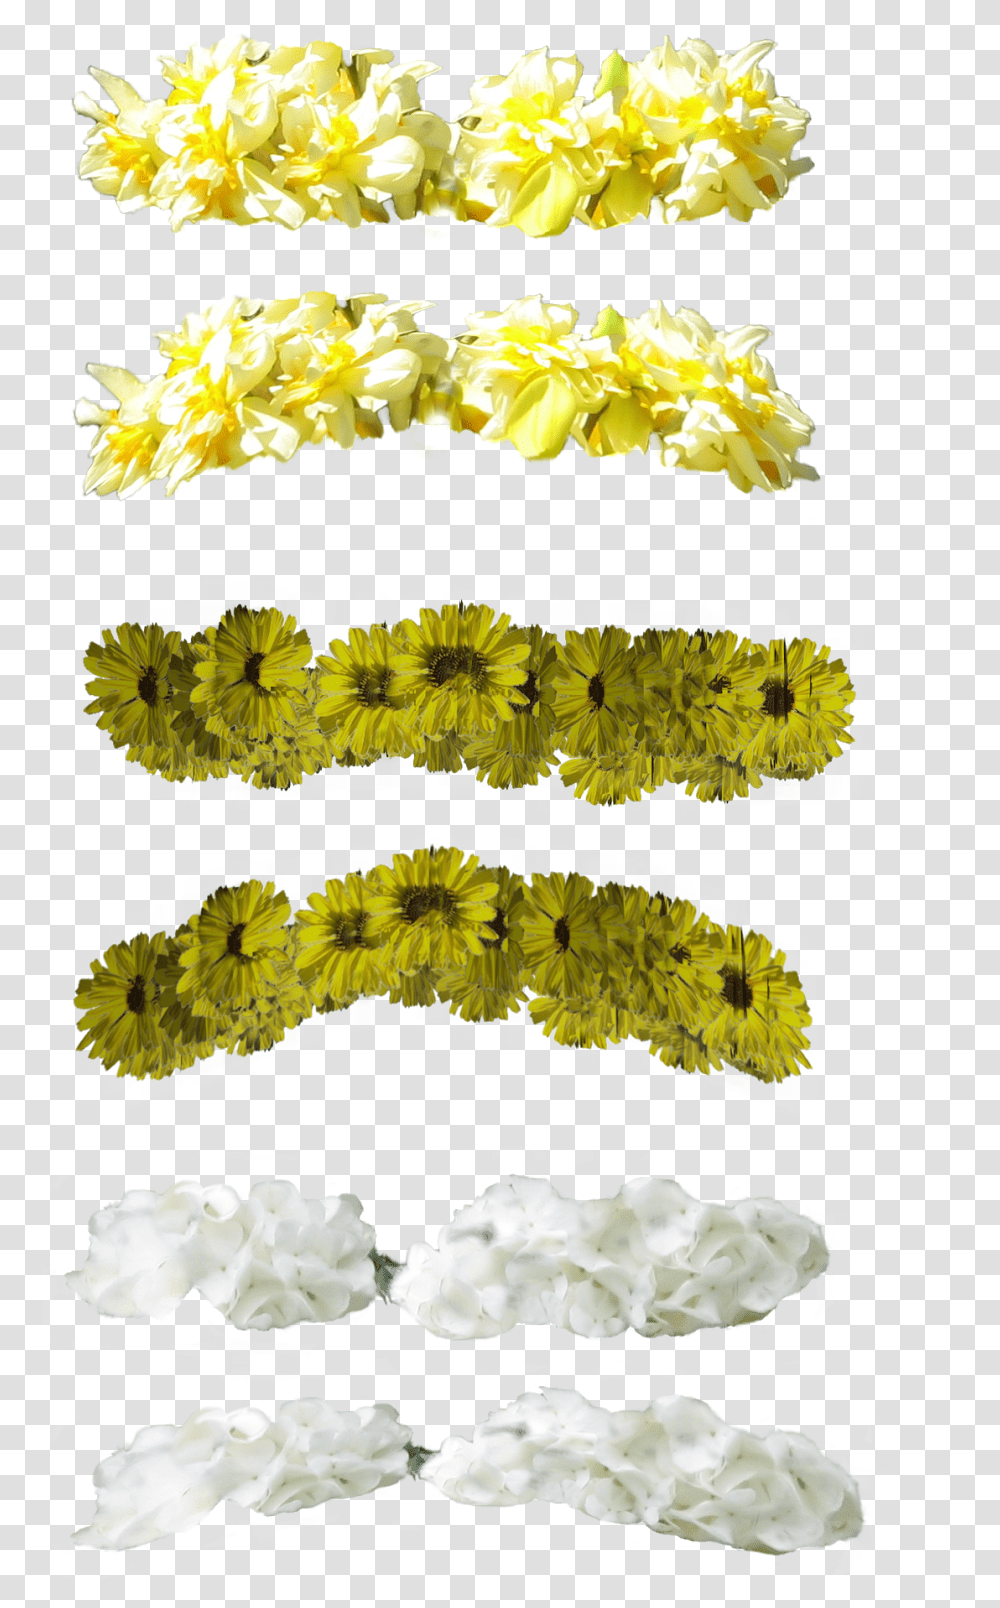 Crown Tumblr Crown Tumblr Green And Yellow Crown Flower, Plant, Flower Arrangement, Ornament, Rug Transparent Png